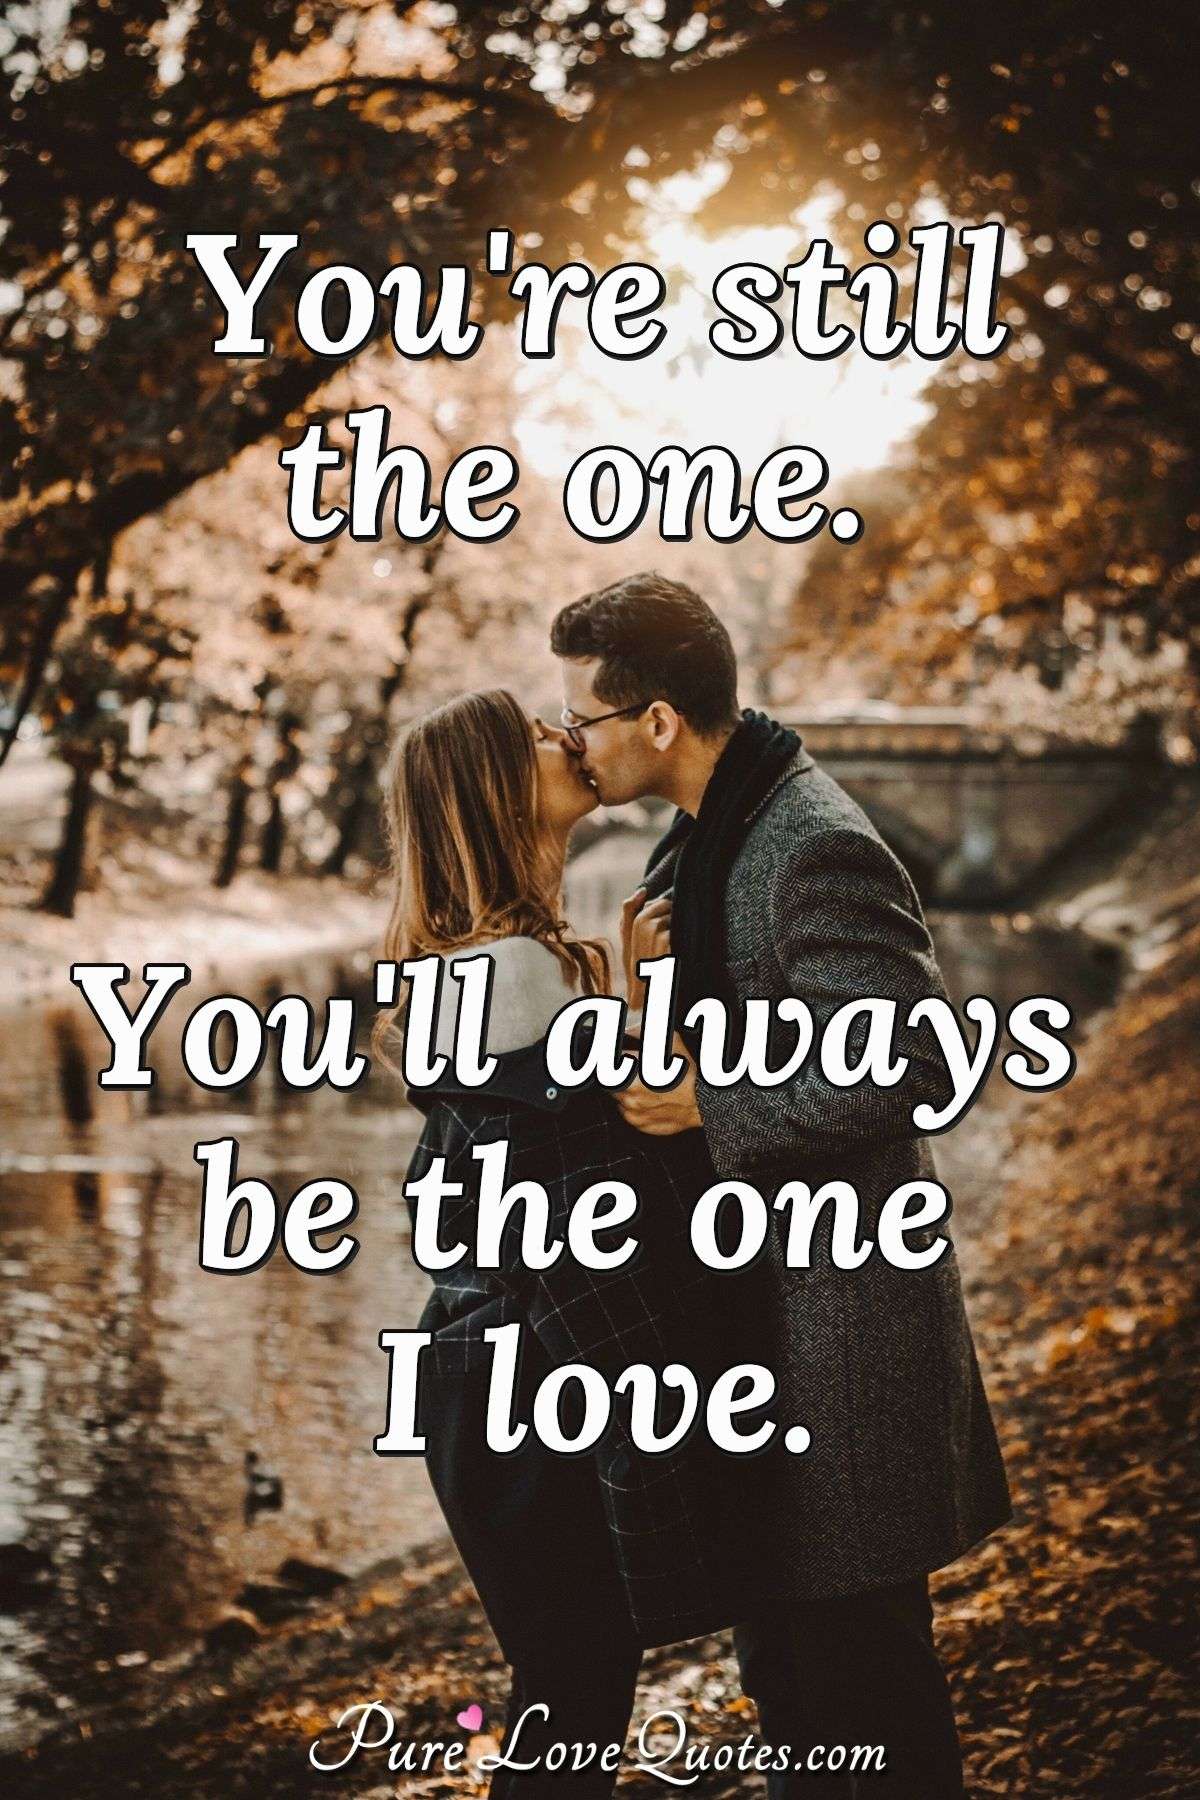 I will always be the one